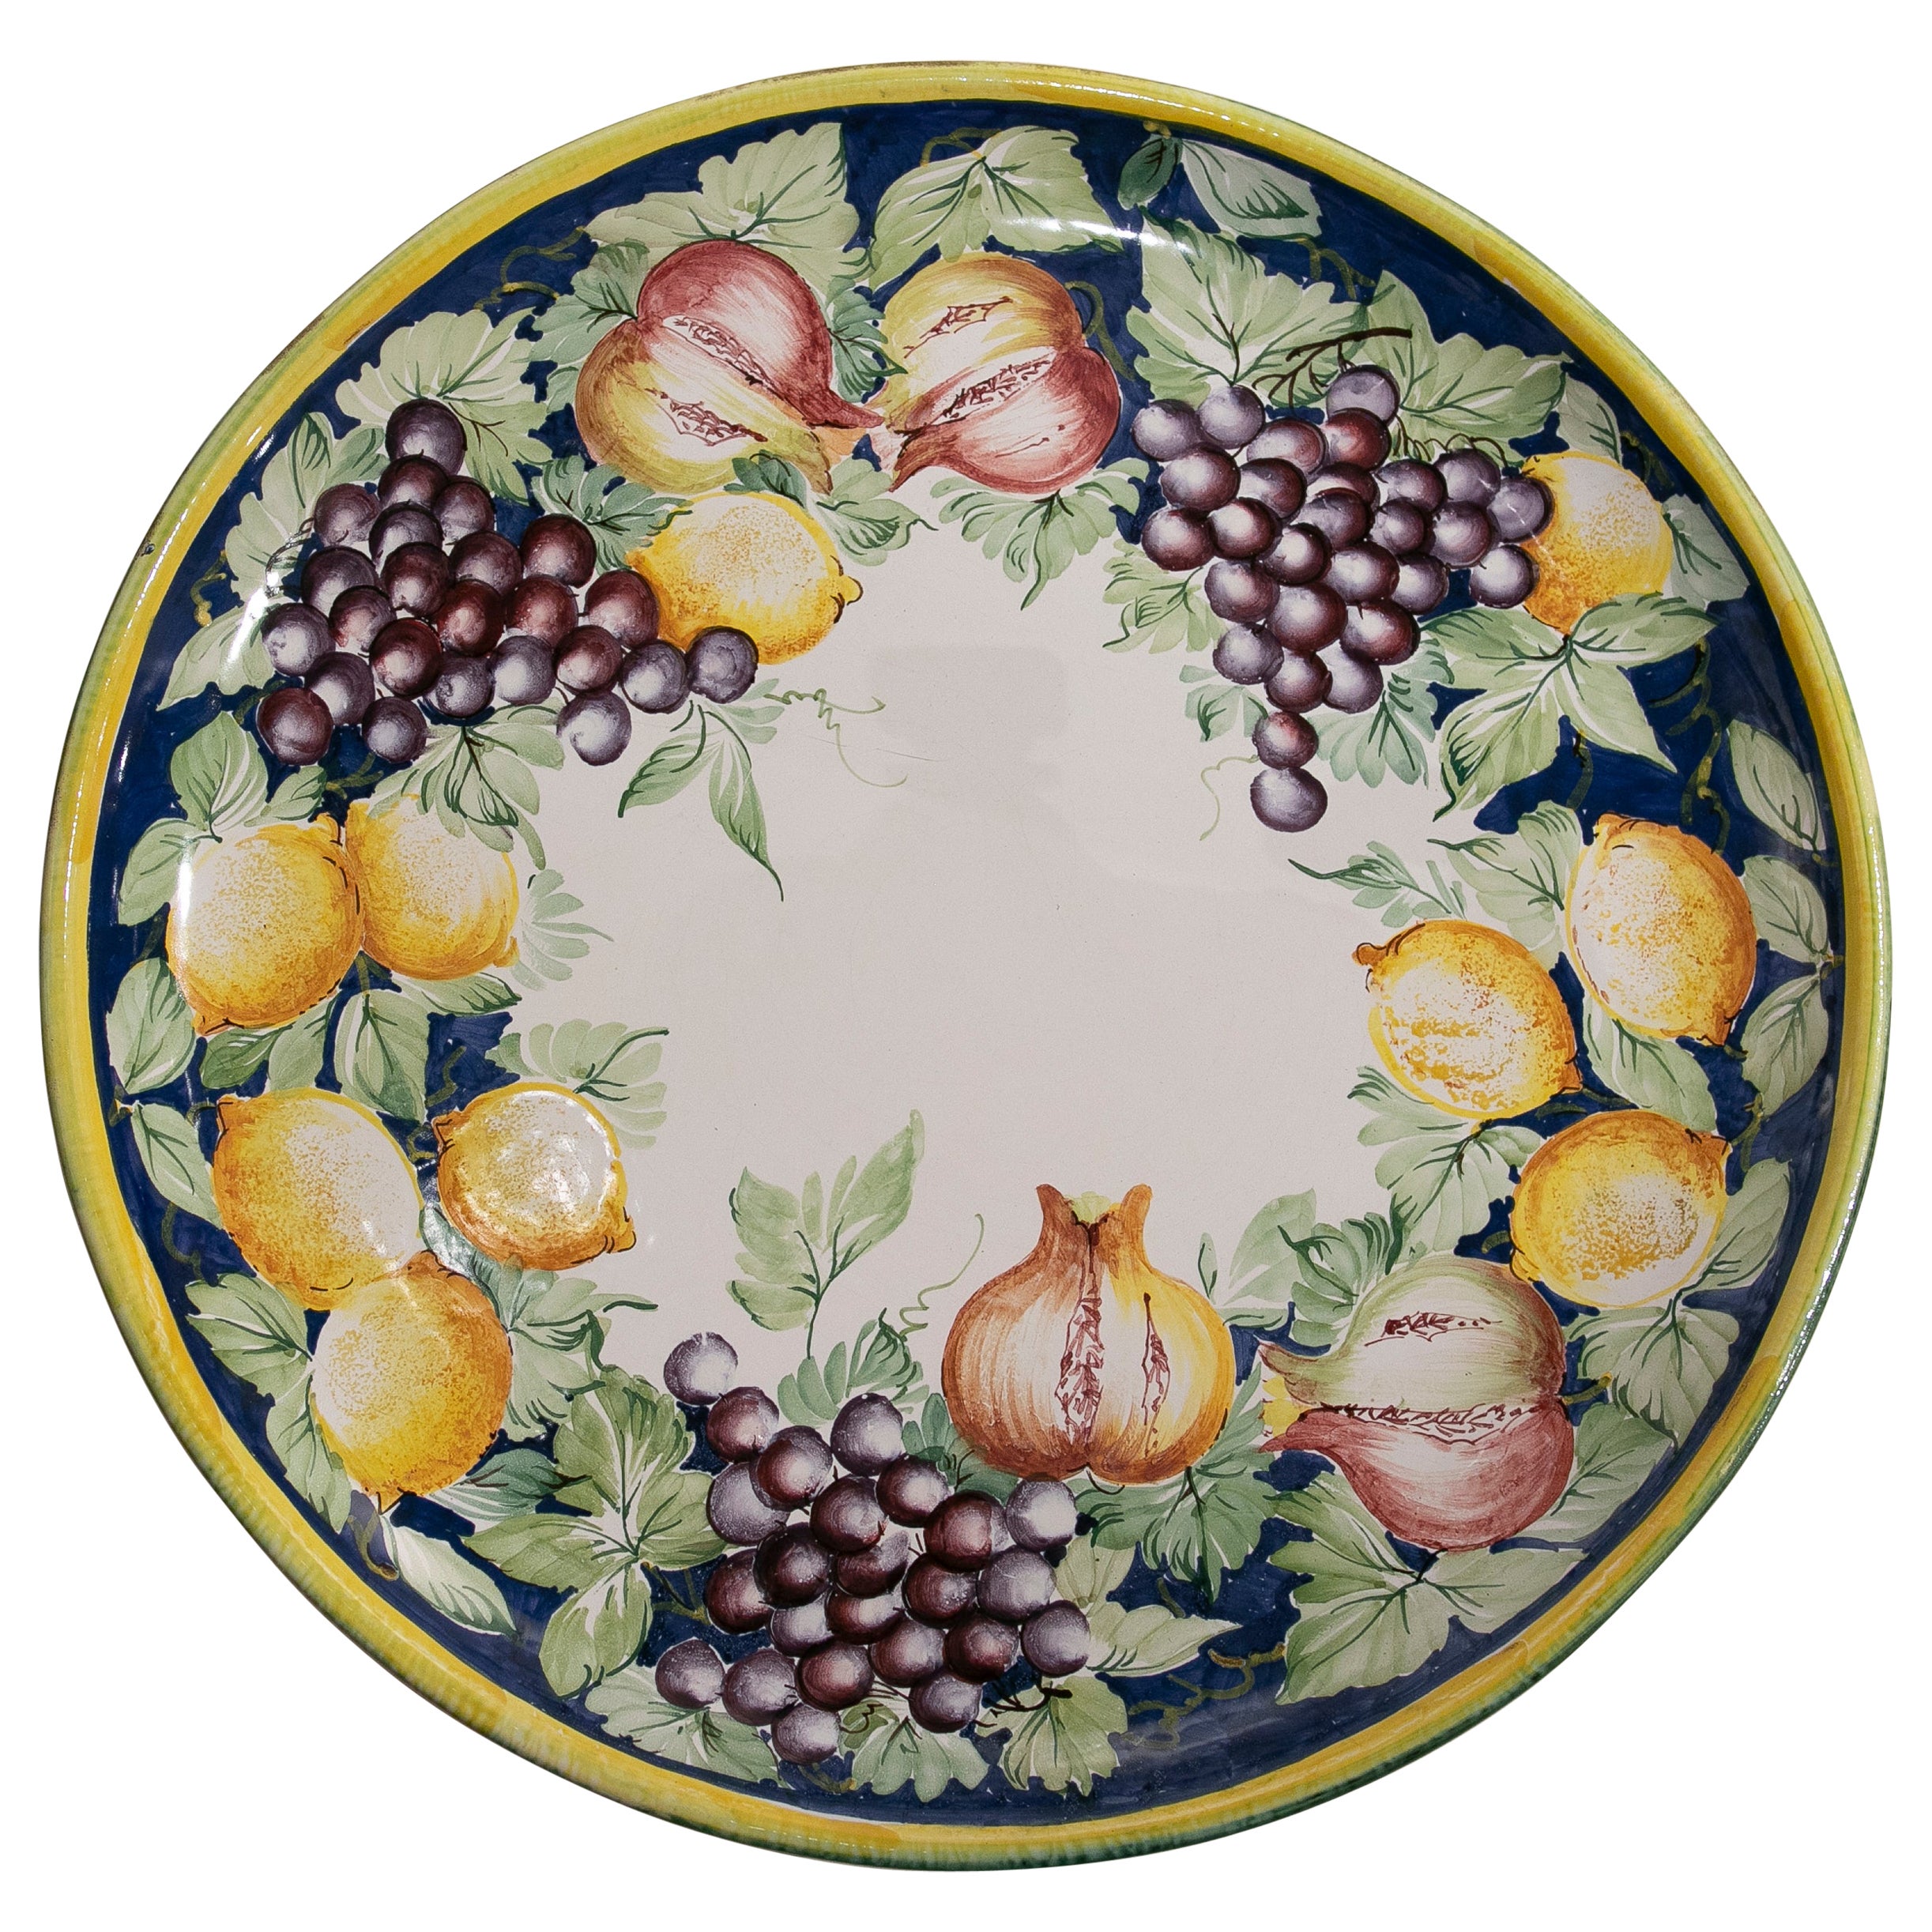 Italian Hand Painted Glazed Ceramic Dish with Fruits and Leaves